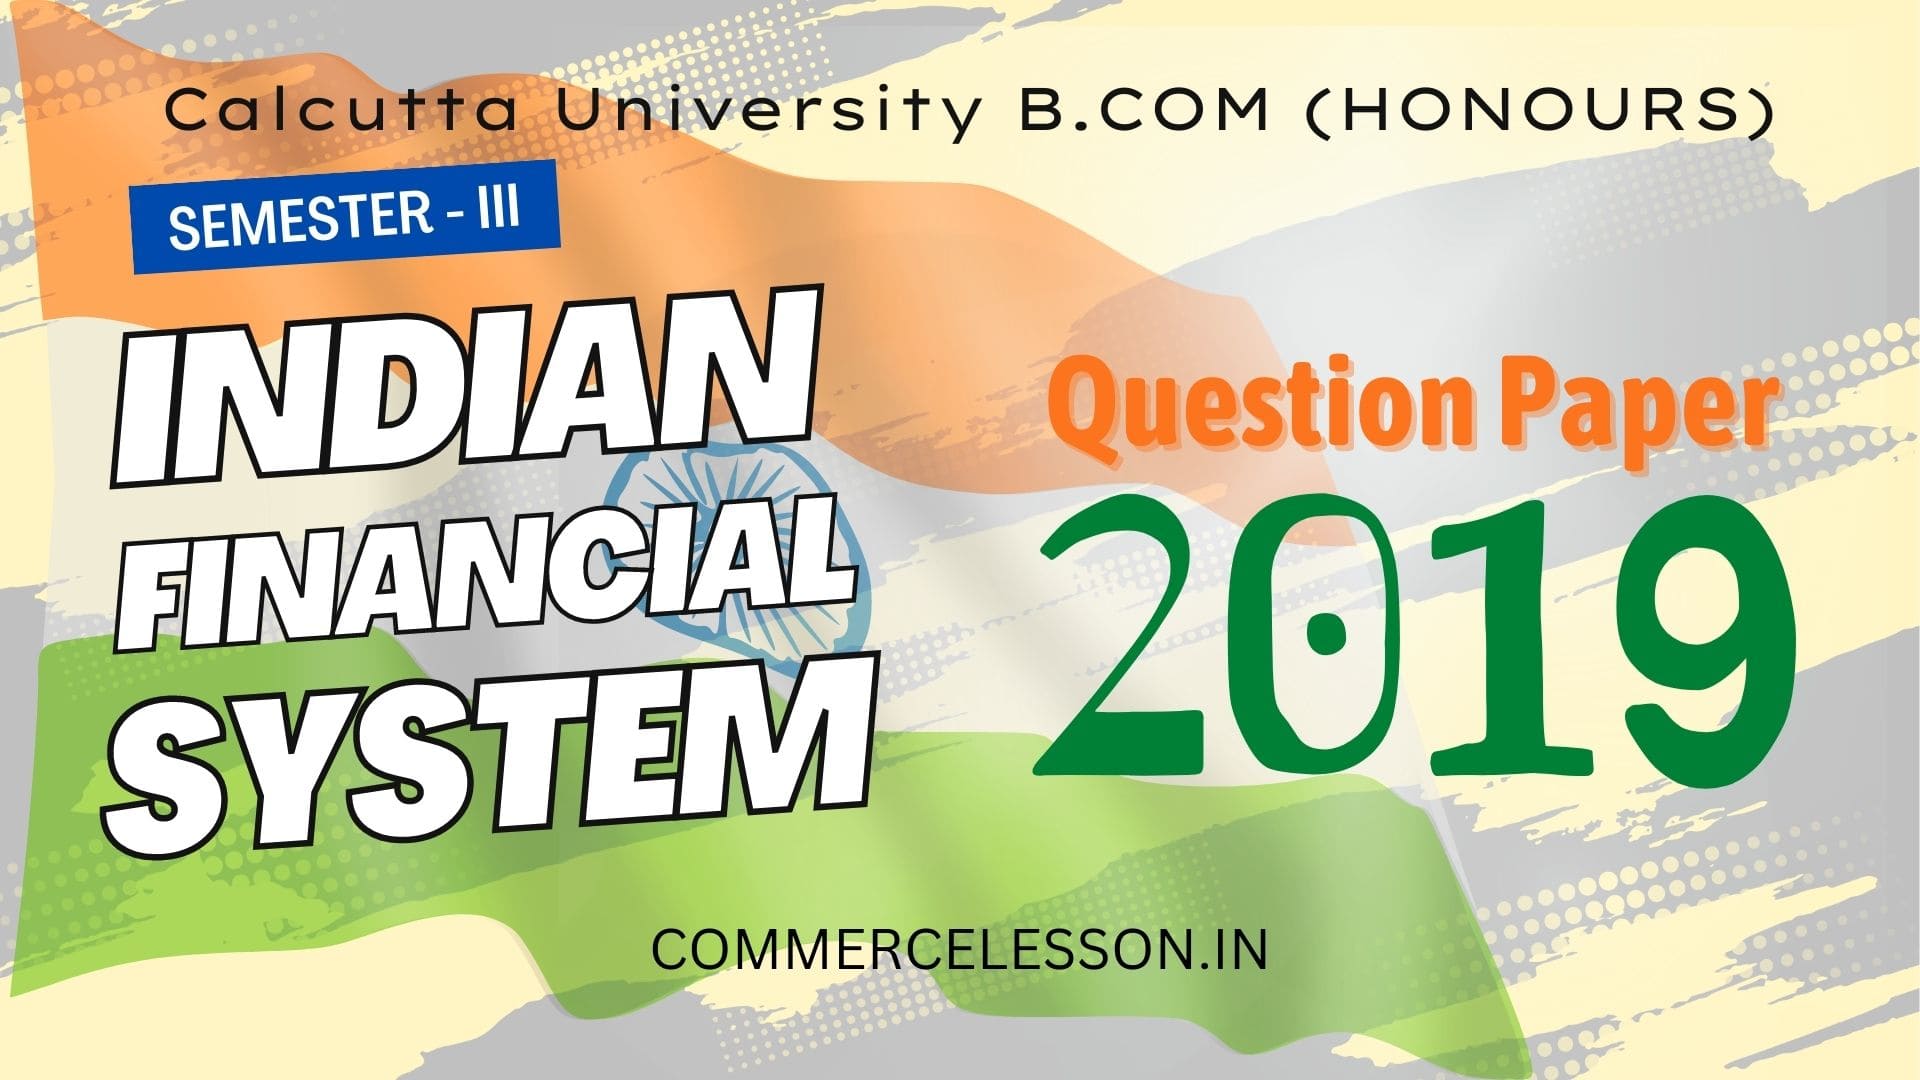 Indian Financial System Honours Question Paper 2019